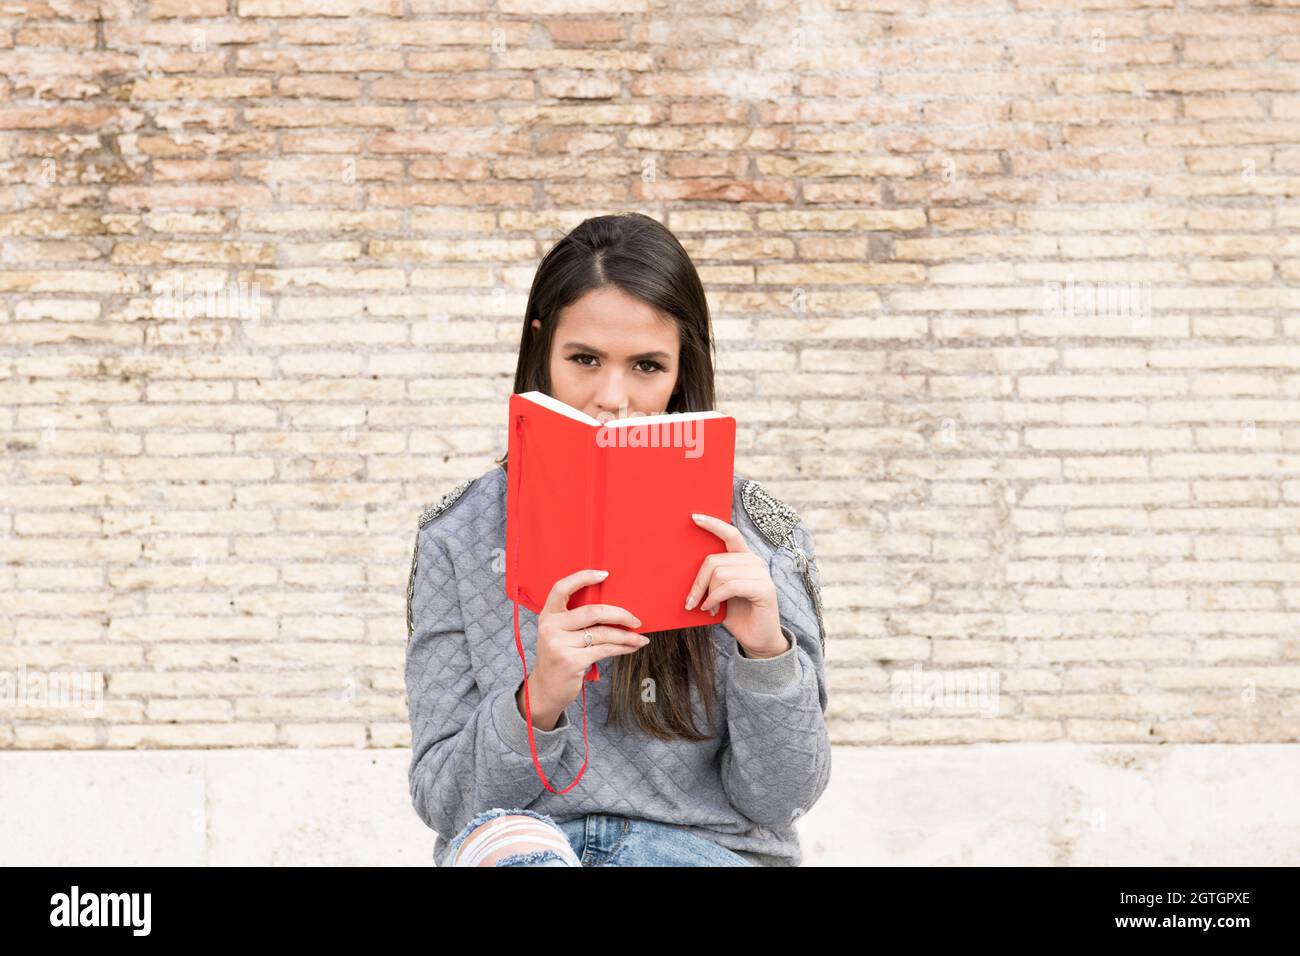 Portrait Of Woman Holding Book Against Brick Wall Stock Photo